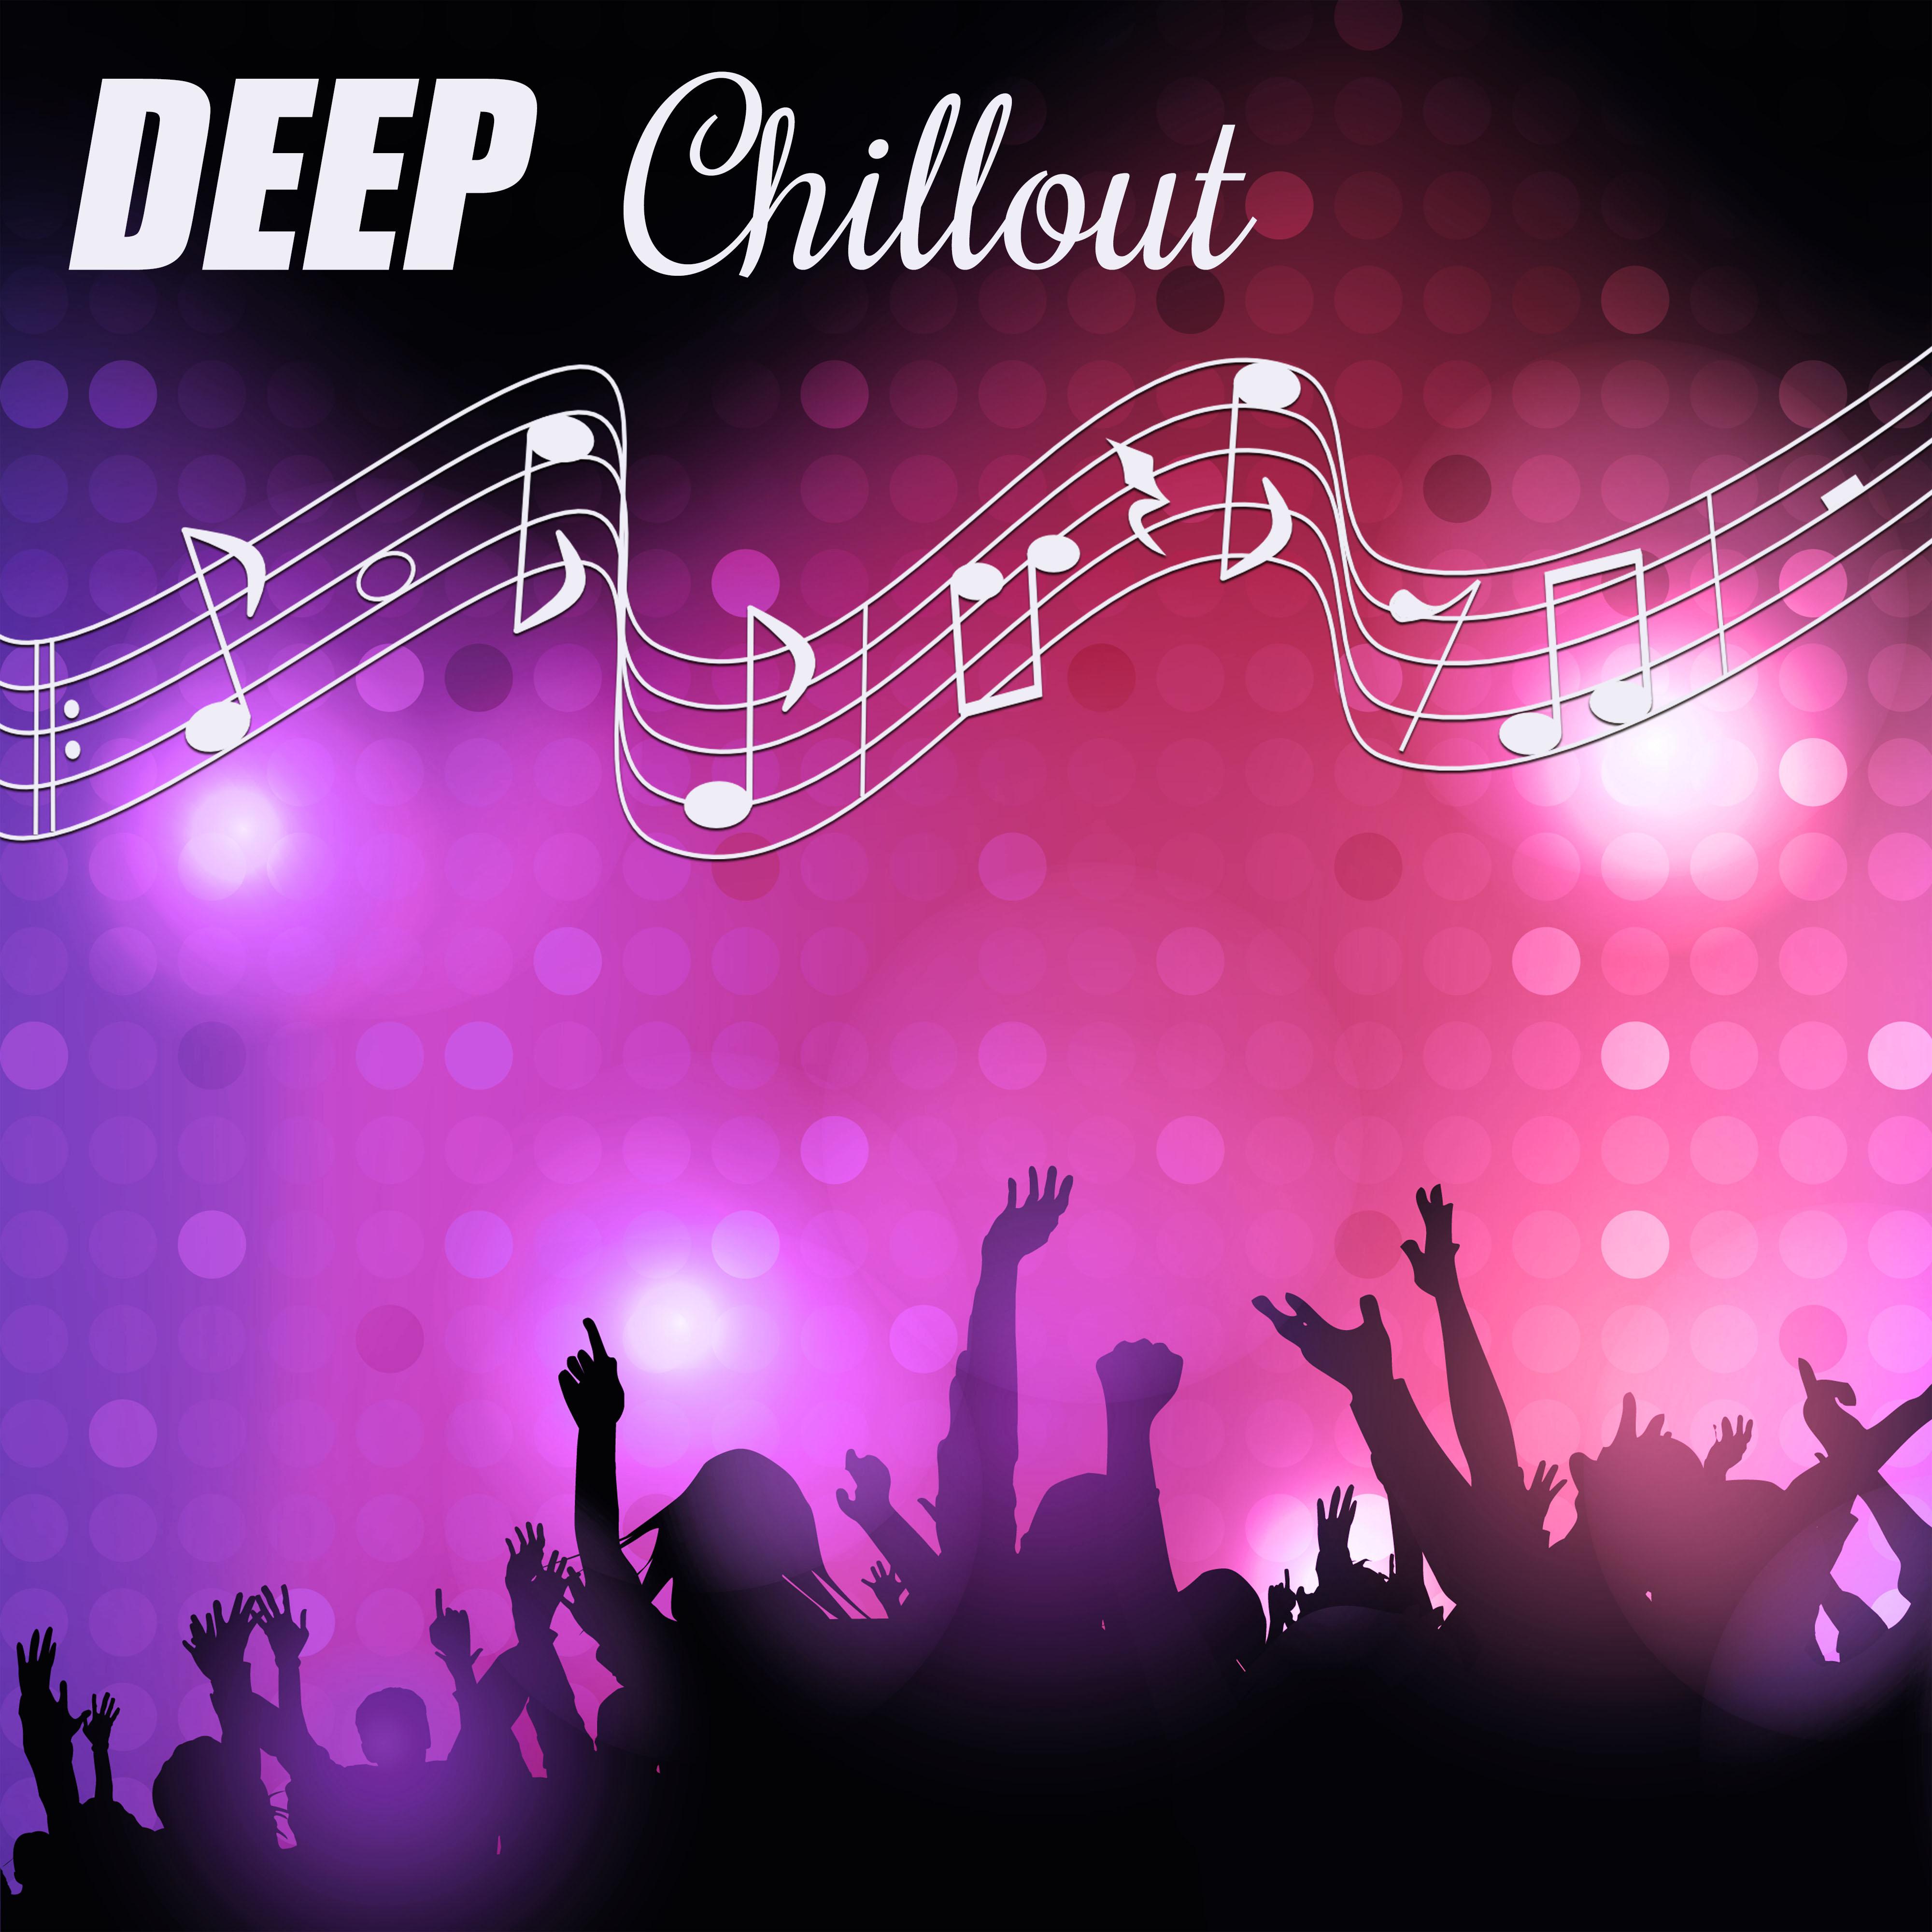 Deep Chillout – Pure Chill Out Sounds, Calm Music for Relaxation